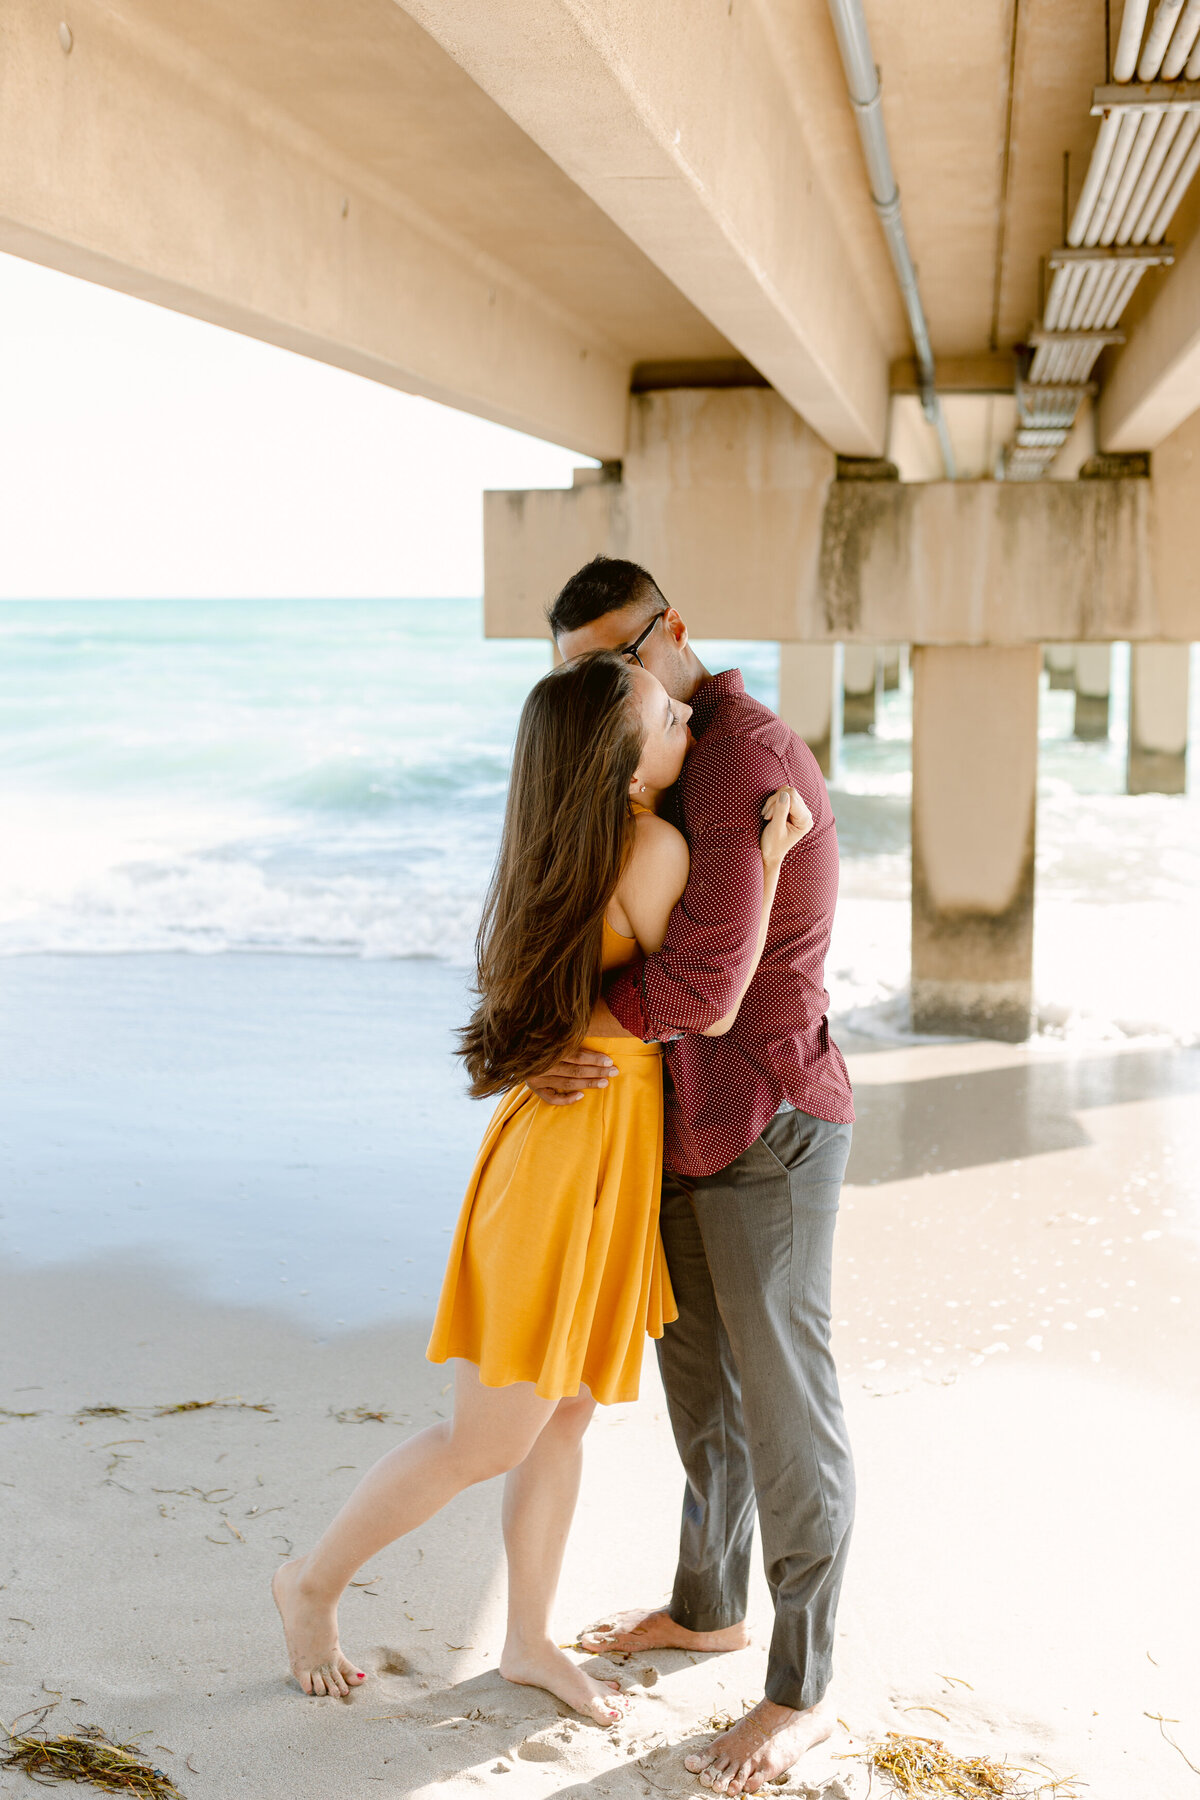 Sunny Isles Beach Engagement Photography Session 15